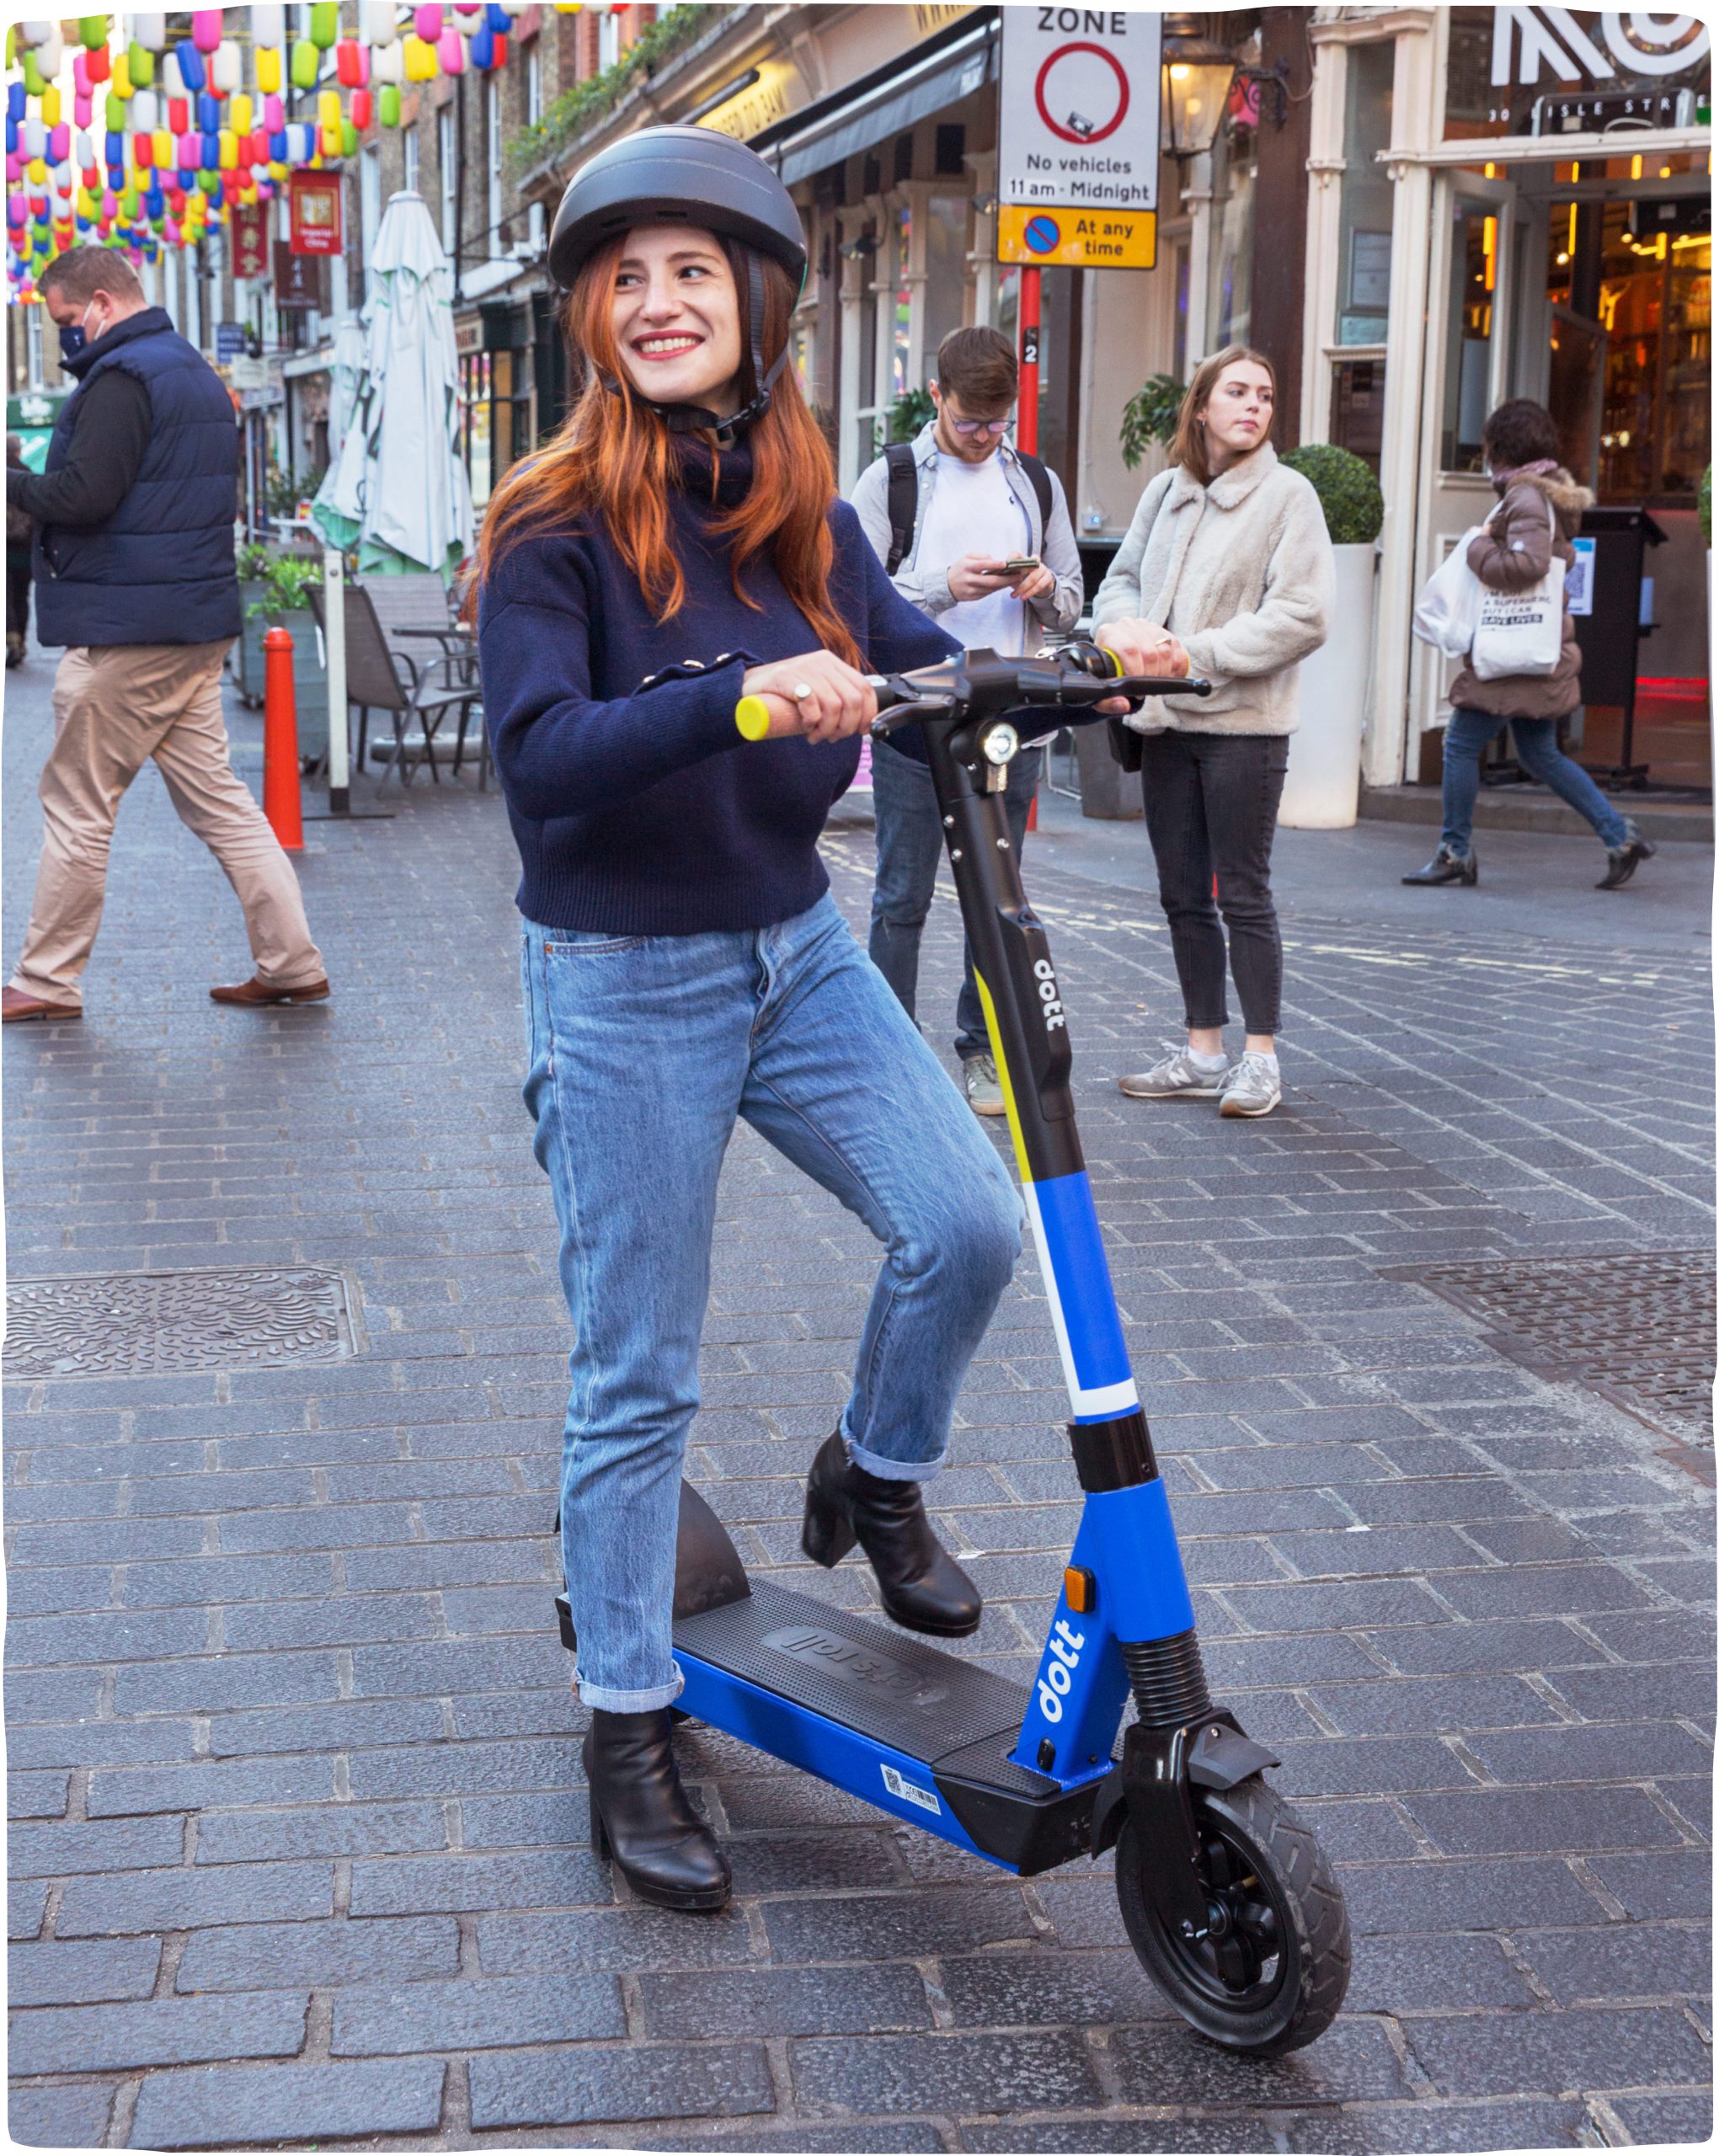 A woman steps onto a blue Dott scooter, smiling and looking into the distance. She is wearing a helmet.